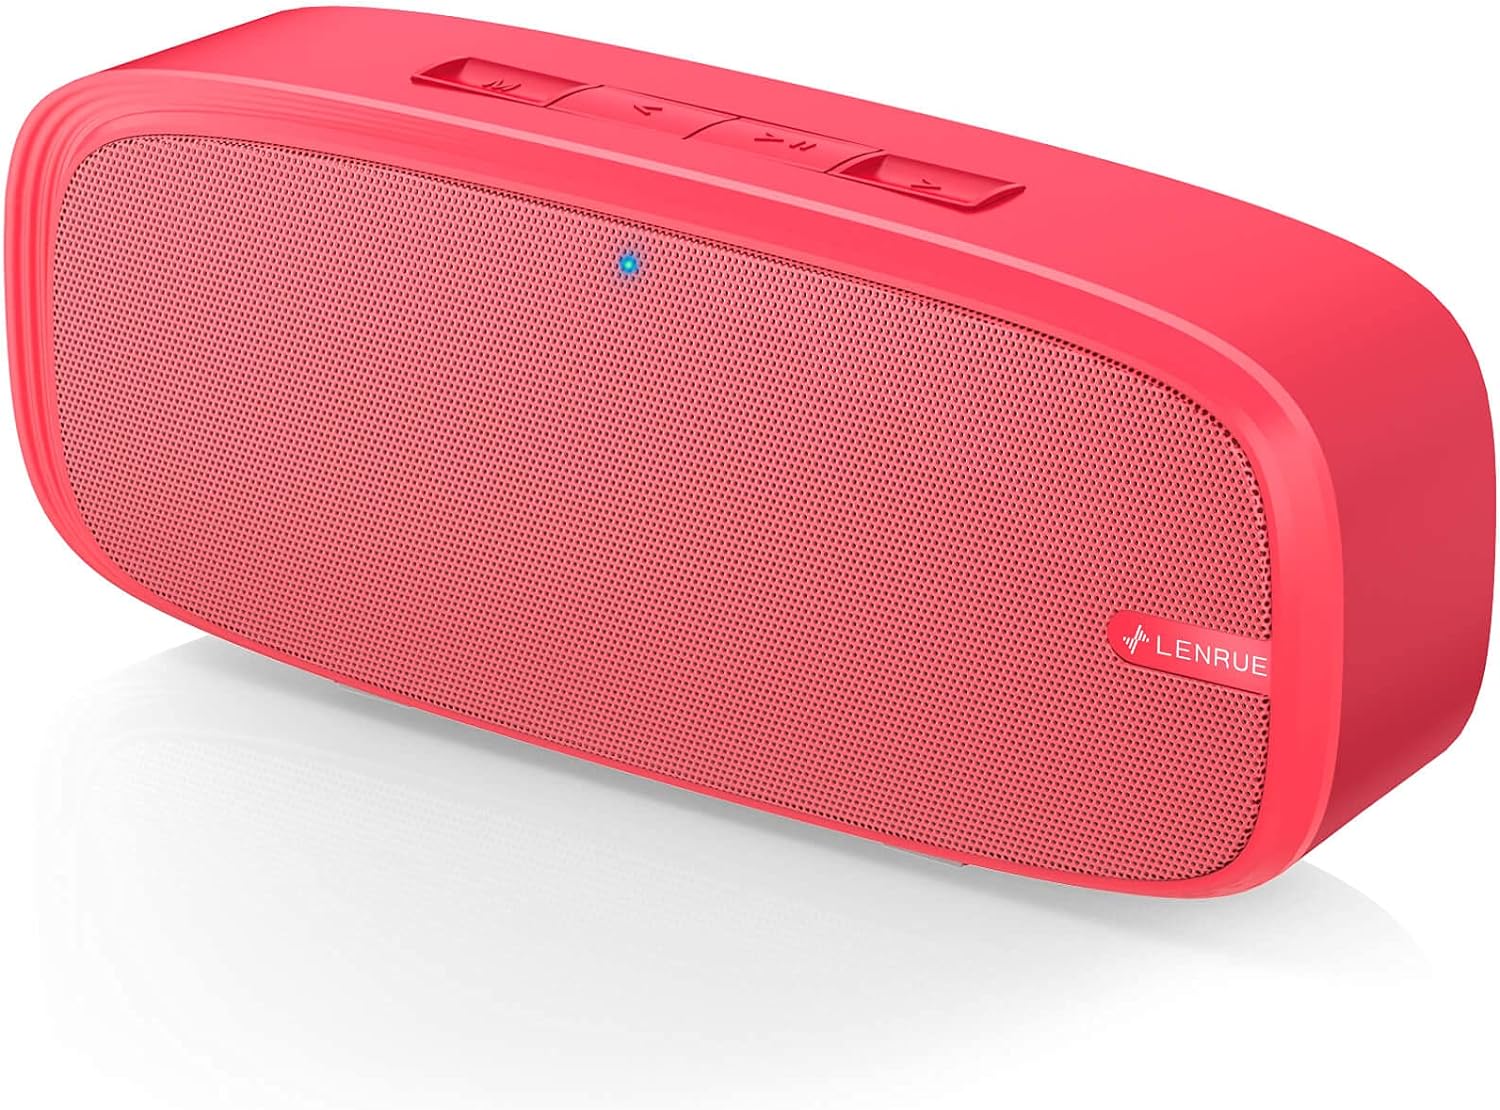 LENRUE Bluetooth Speaker, Wireless Portable Speaker with Loud Stereo Sound, Rich Bass, 12-Hour Playtime, Built-in Mic. Perfect for iPhone, Samsung and More (Red)